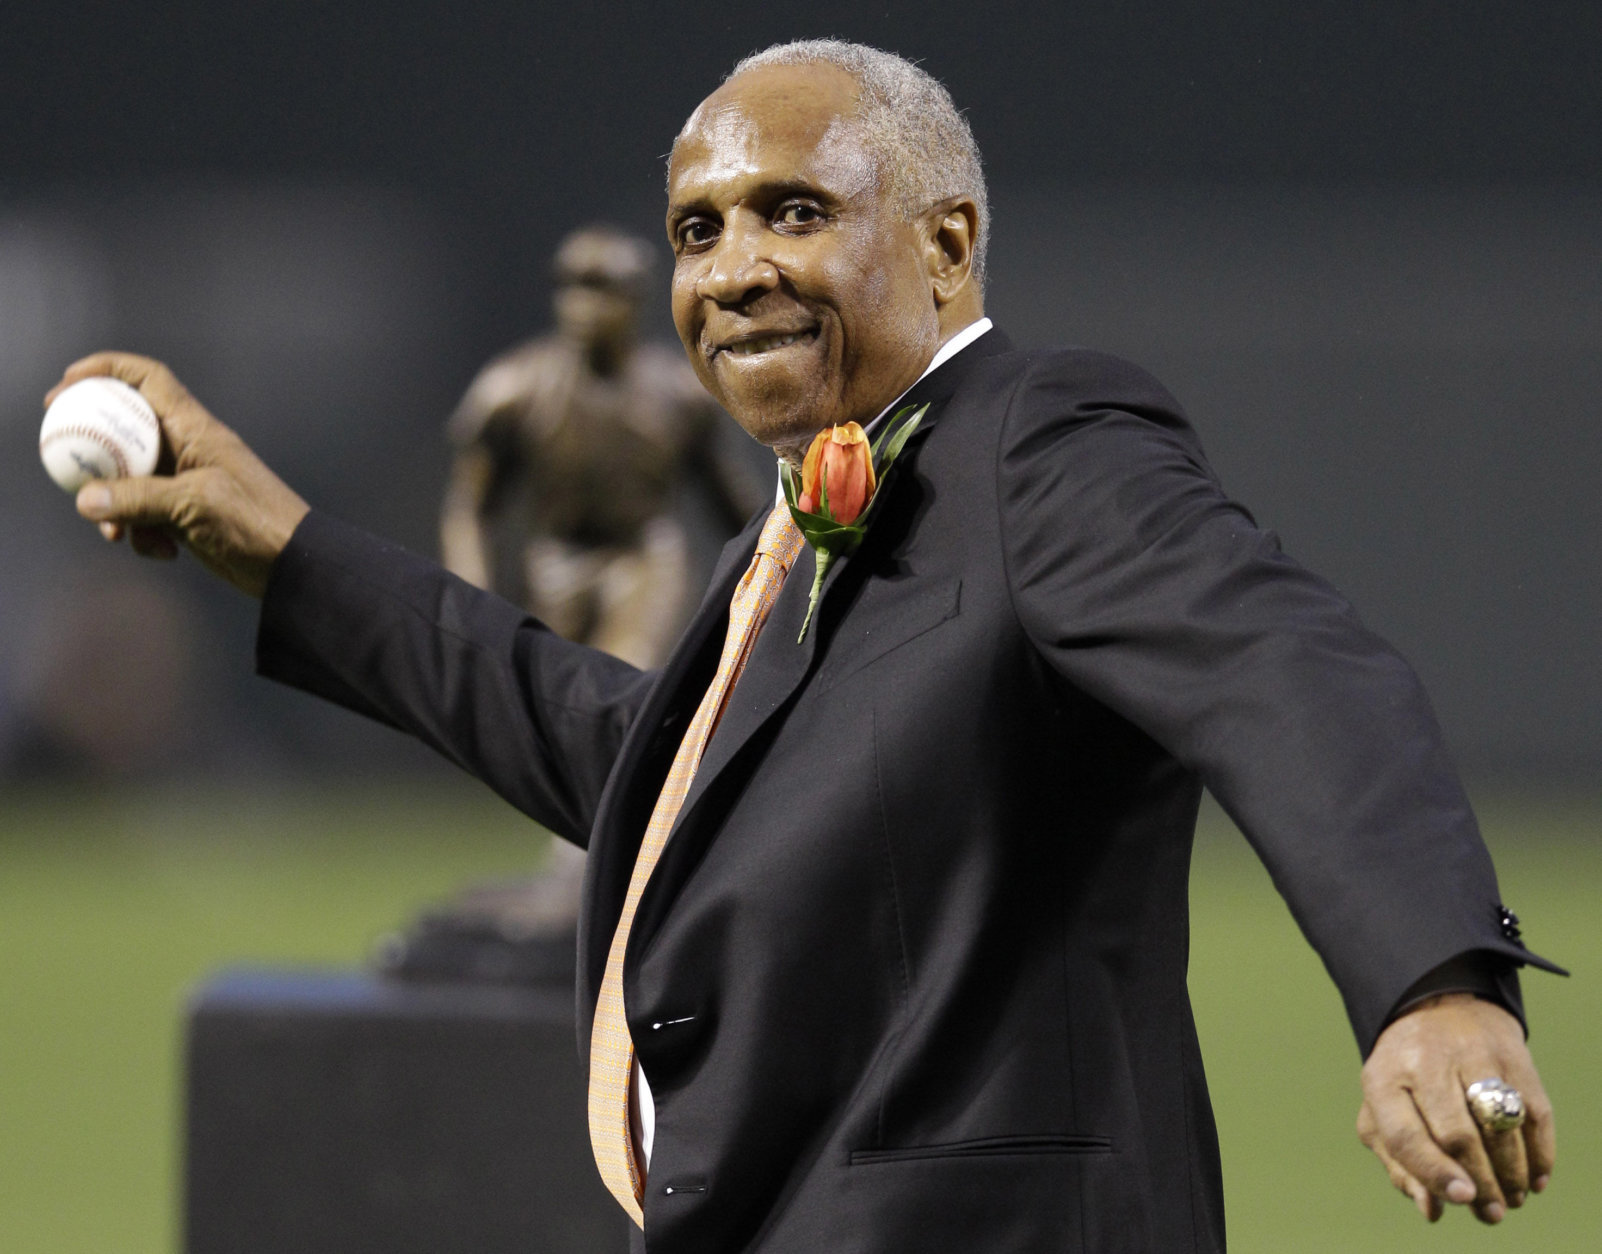 Frank Robinson dead at age 83, according to reports